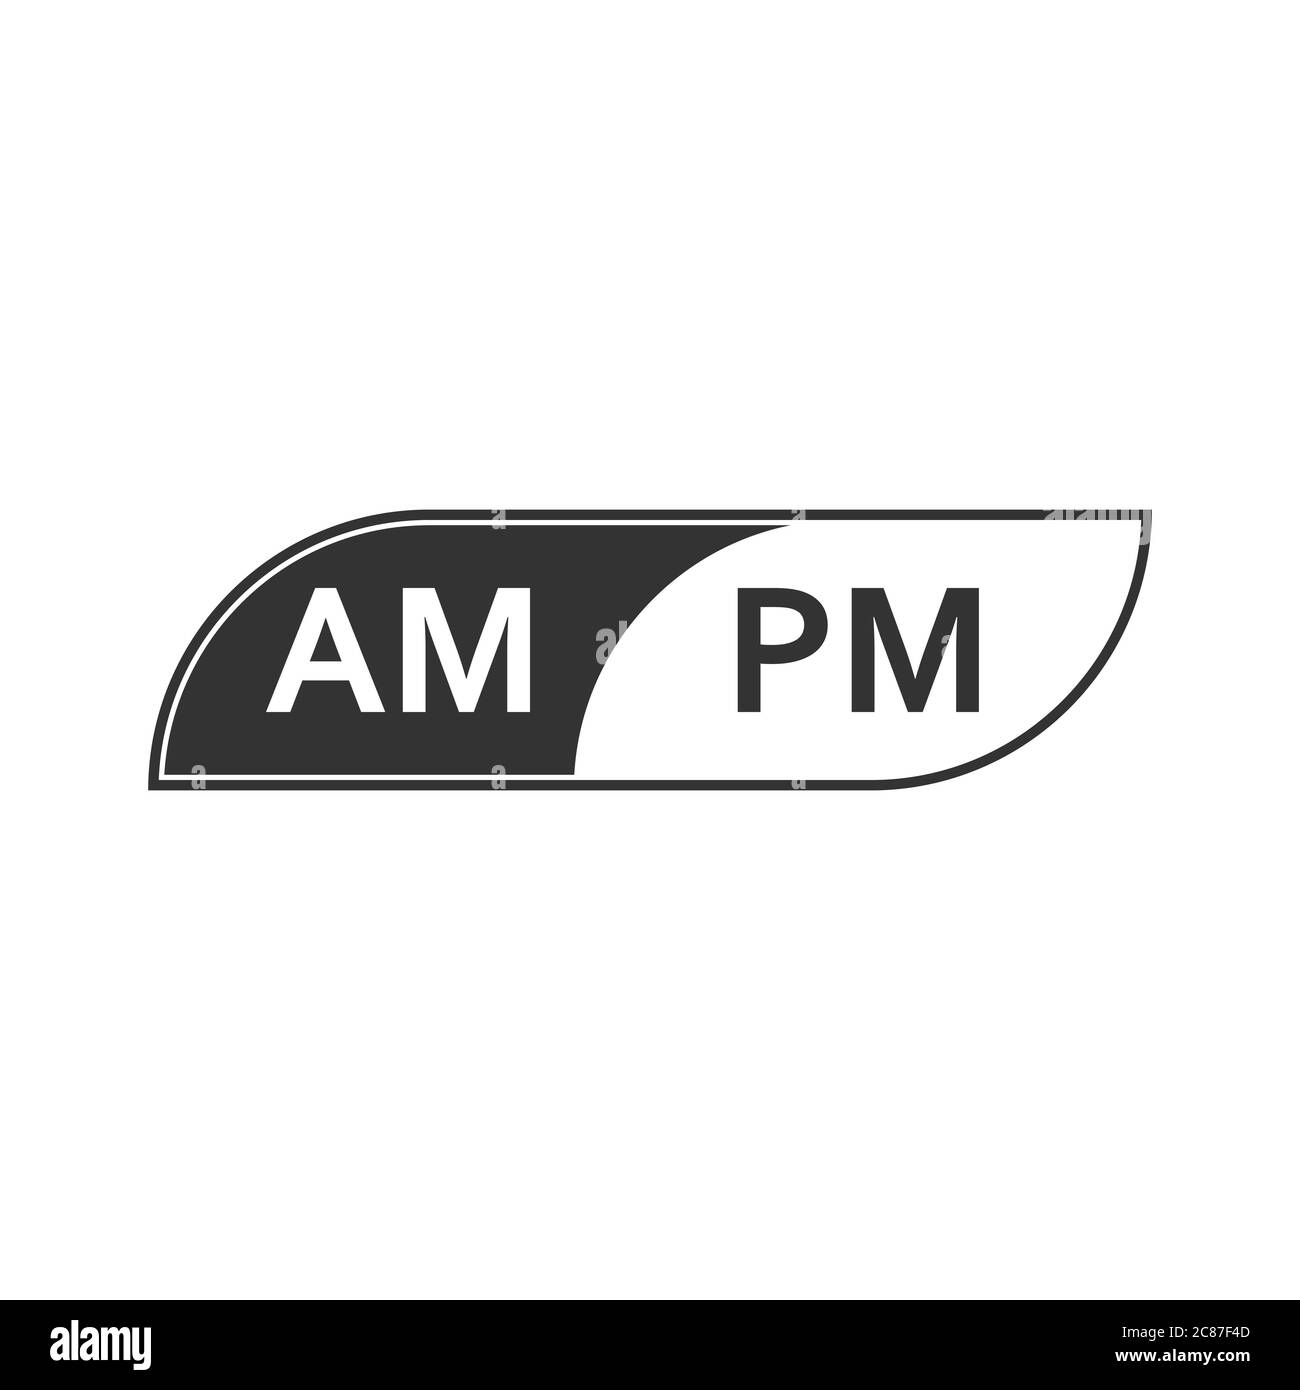 Stylized icon with abbreviation for hours before noon and after noon on the clock face, isolated on a white background Stock Vector